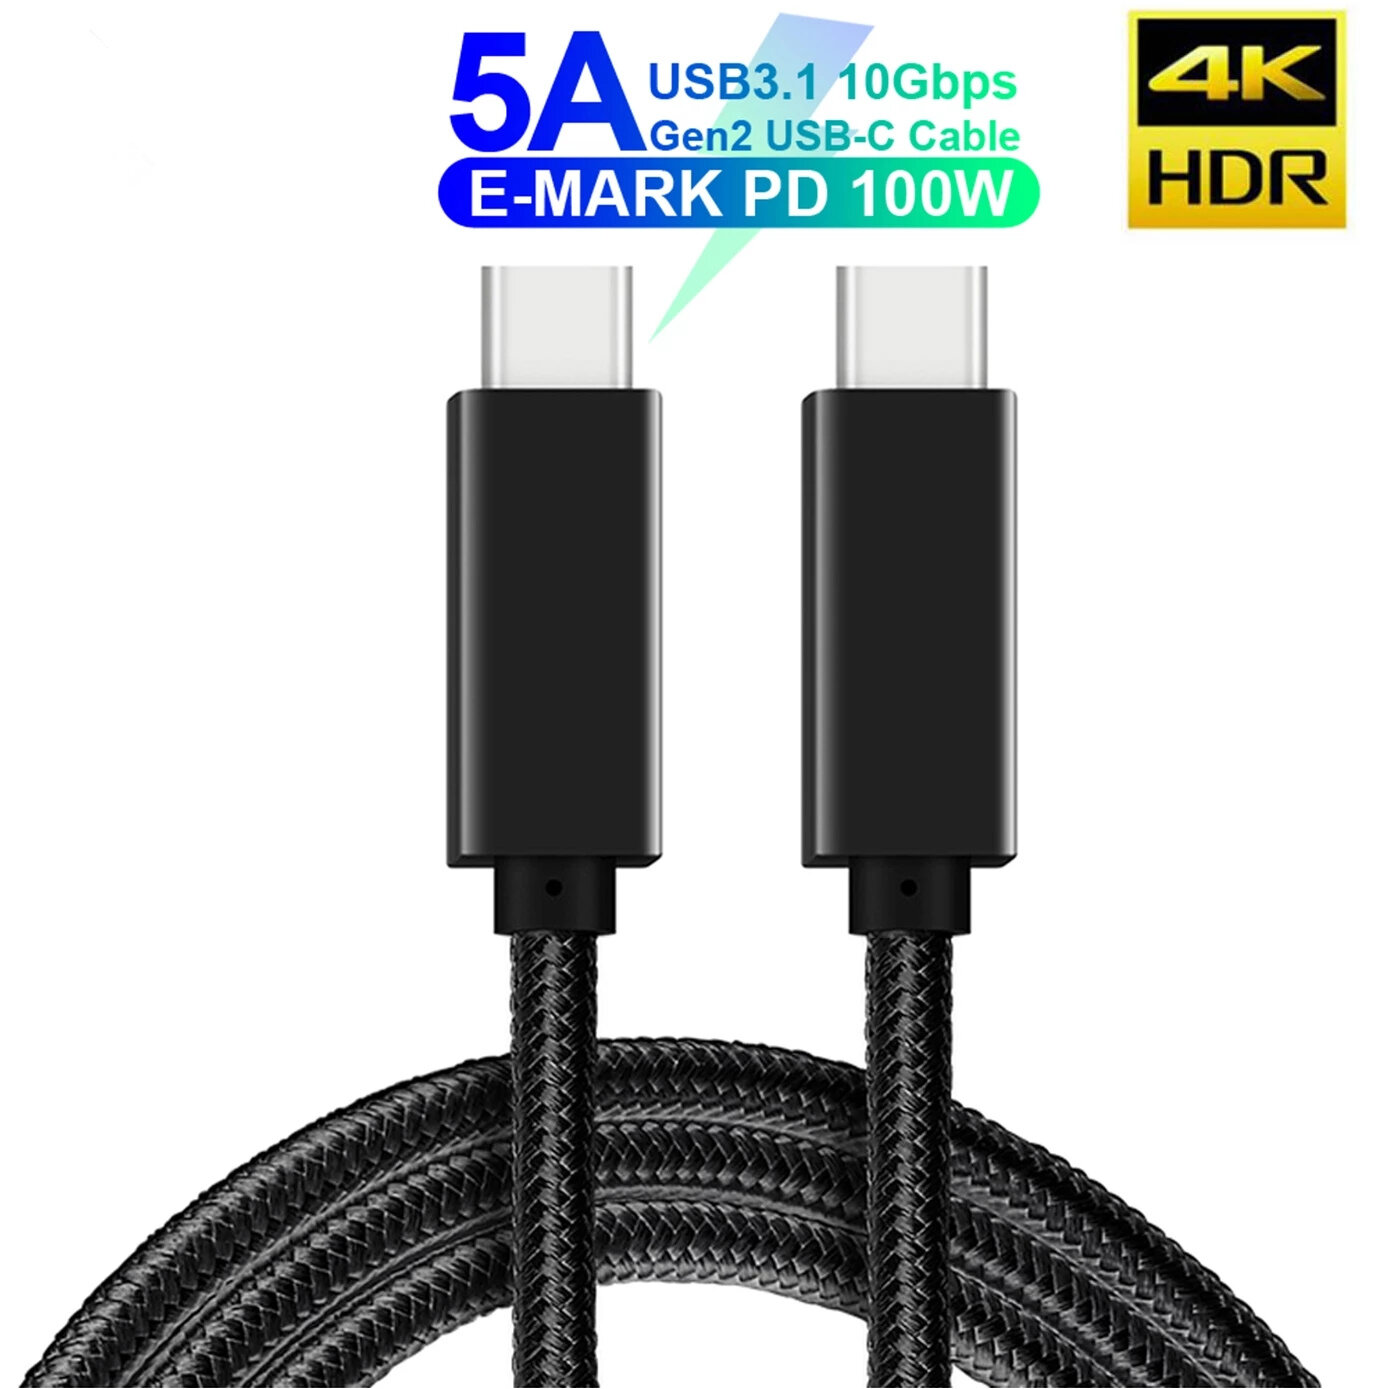 

E-MARK Type-C to Type-C 5A PD 100W USB3.1 Gen2 10Gbps 4K Video Output Power Data Cable for Computer for MacBook for Sams